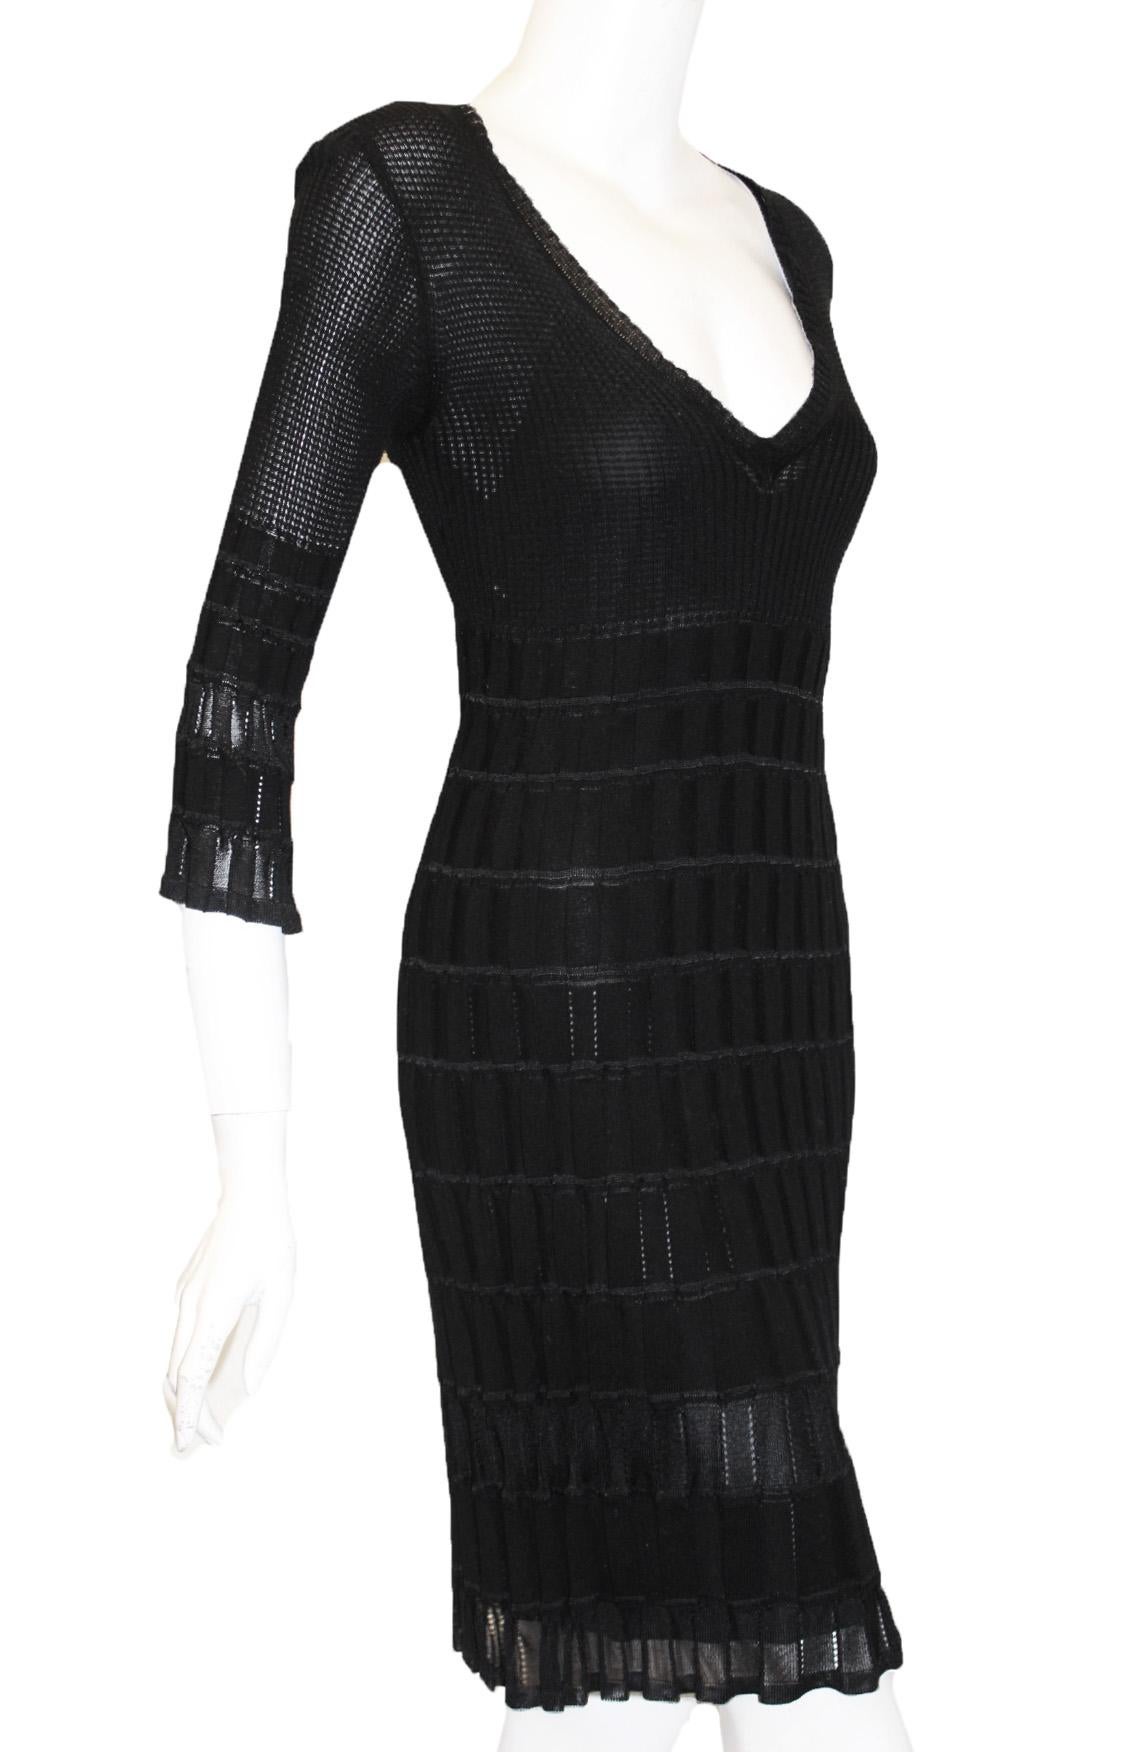 Missoni black 3/4 sleeve knit dress includes a low cut V neck.  The skirt of this dress is more textured cable knit with box pleat design.  This  solid color dress is composed of a stretchy knit fabric and has some give for the wearer.  The dress